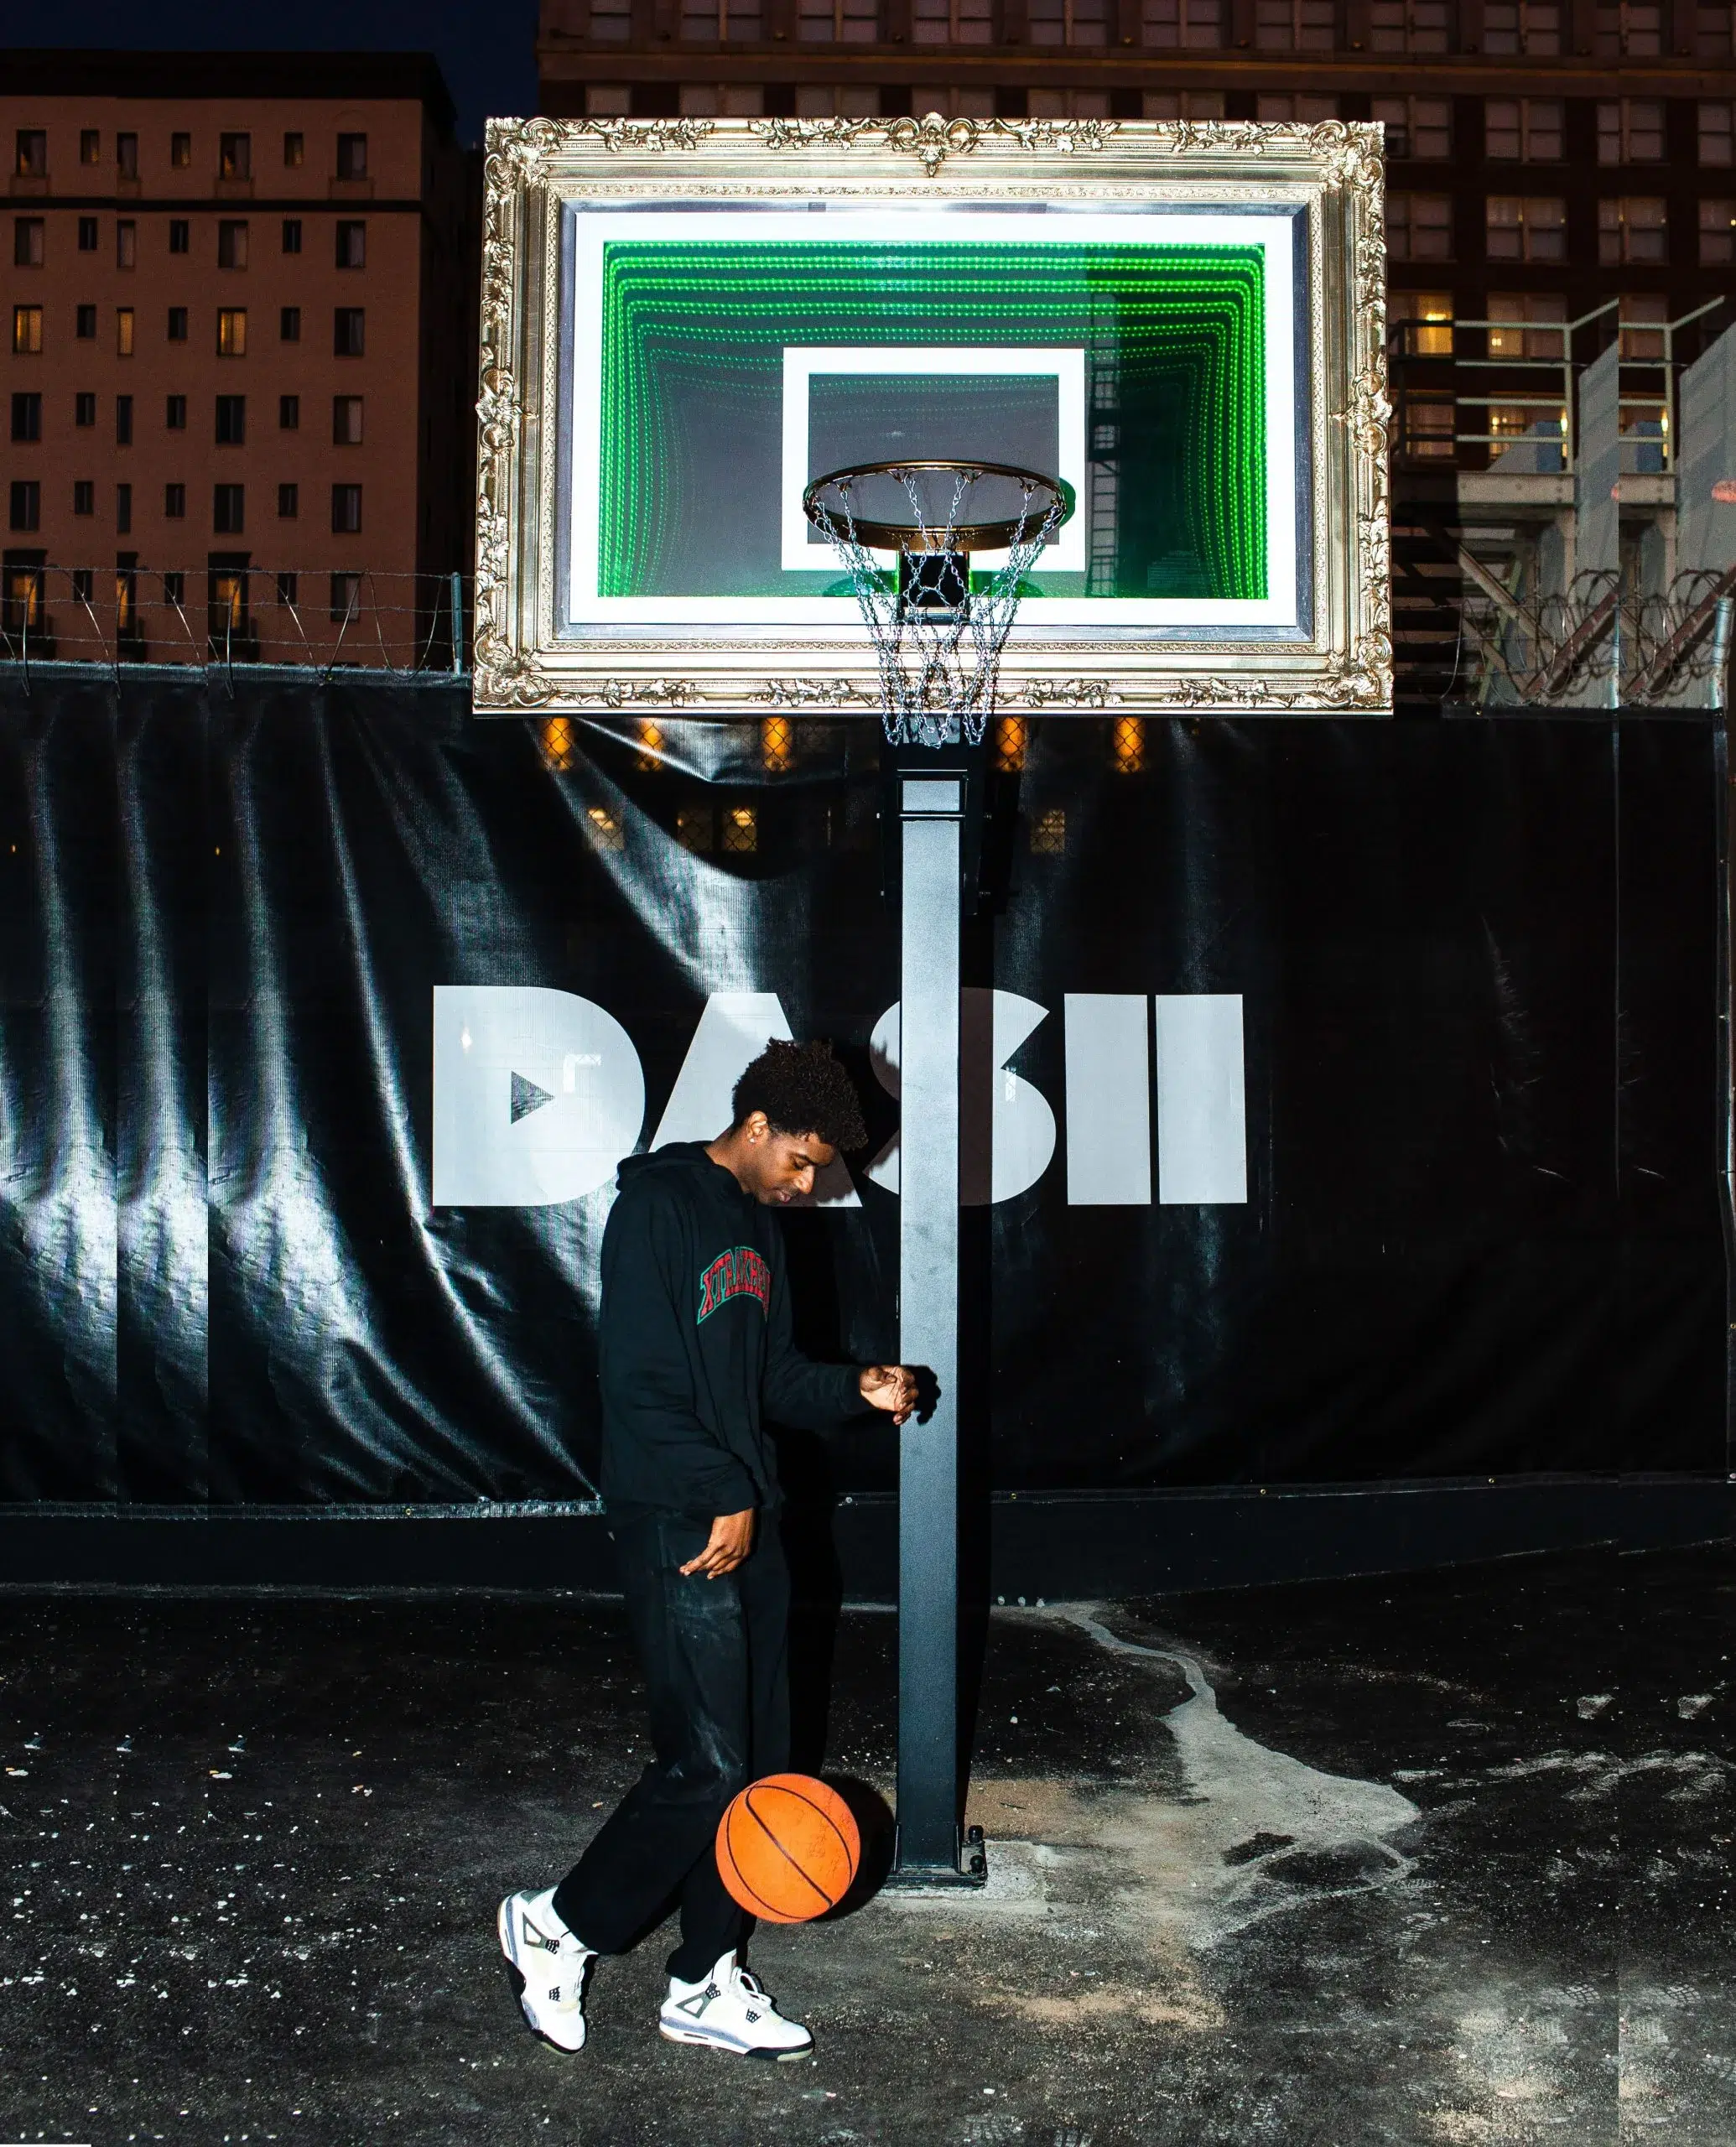 A man holding a basketball in front of a basketball hoop.